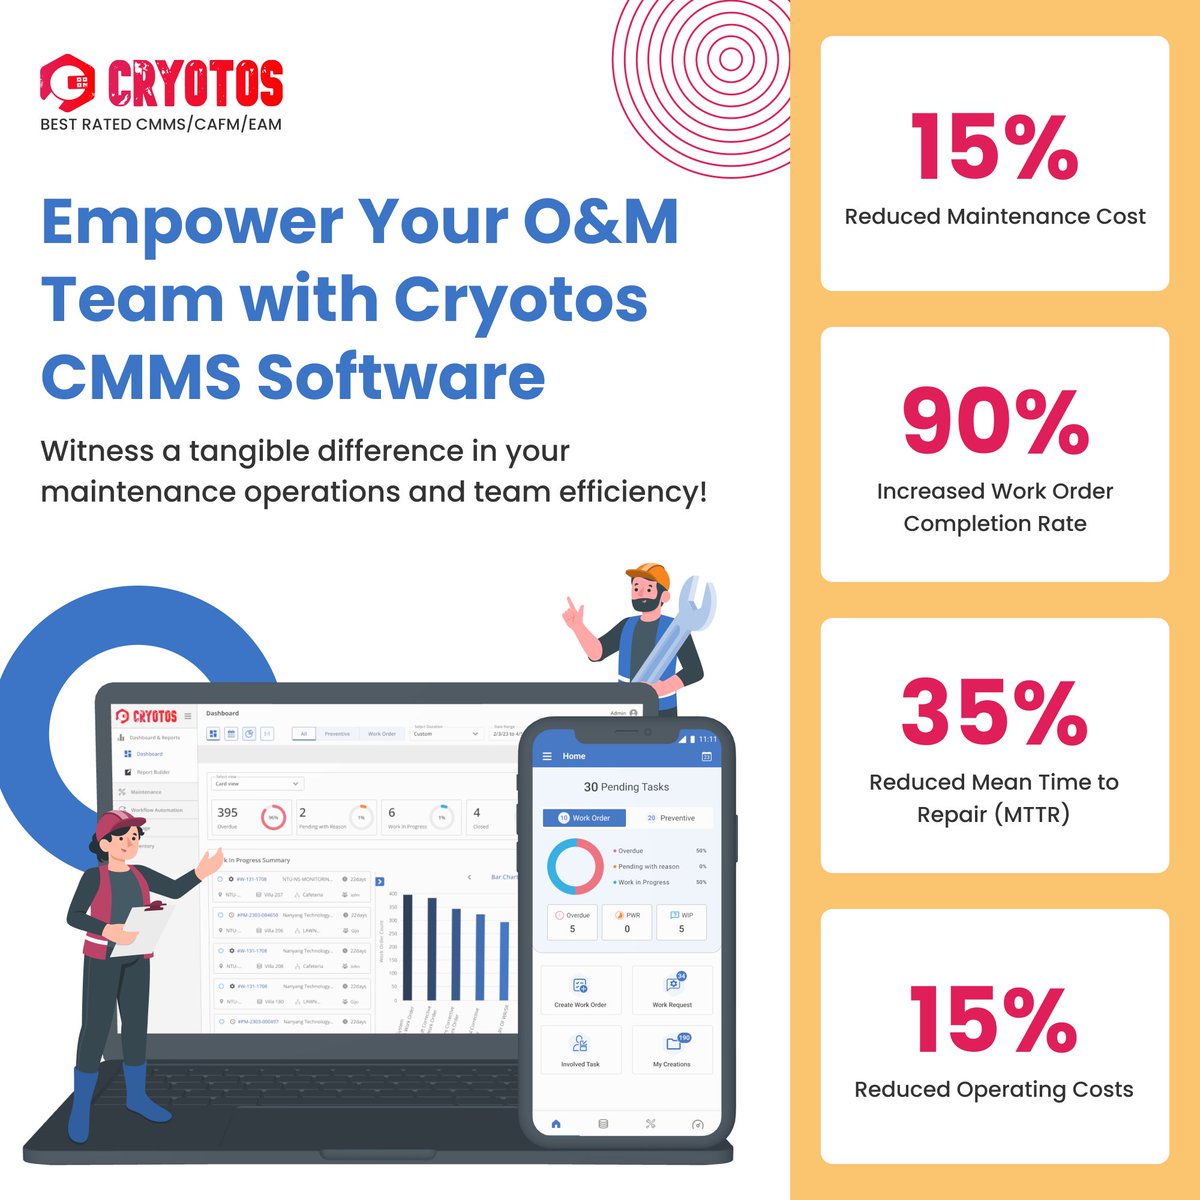 cryotos.com - Transform your maintenance operations with Cryotos CMMS, the ultimate tool designed to streamline your #maintenance processes. Experience tangible benefits that make a real difference! #cmms #cmmssoftware #workorders #workordermanagement #cryotos